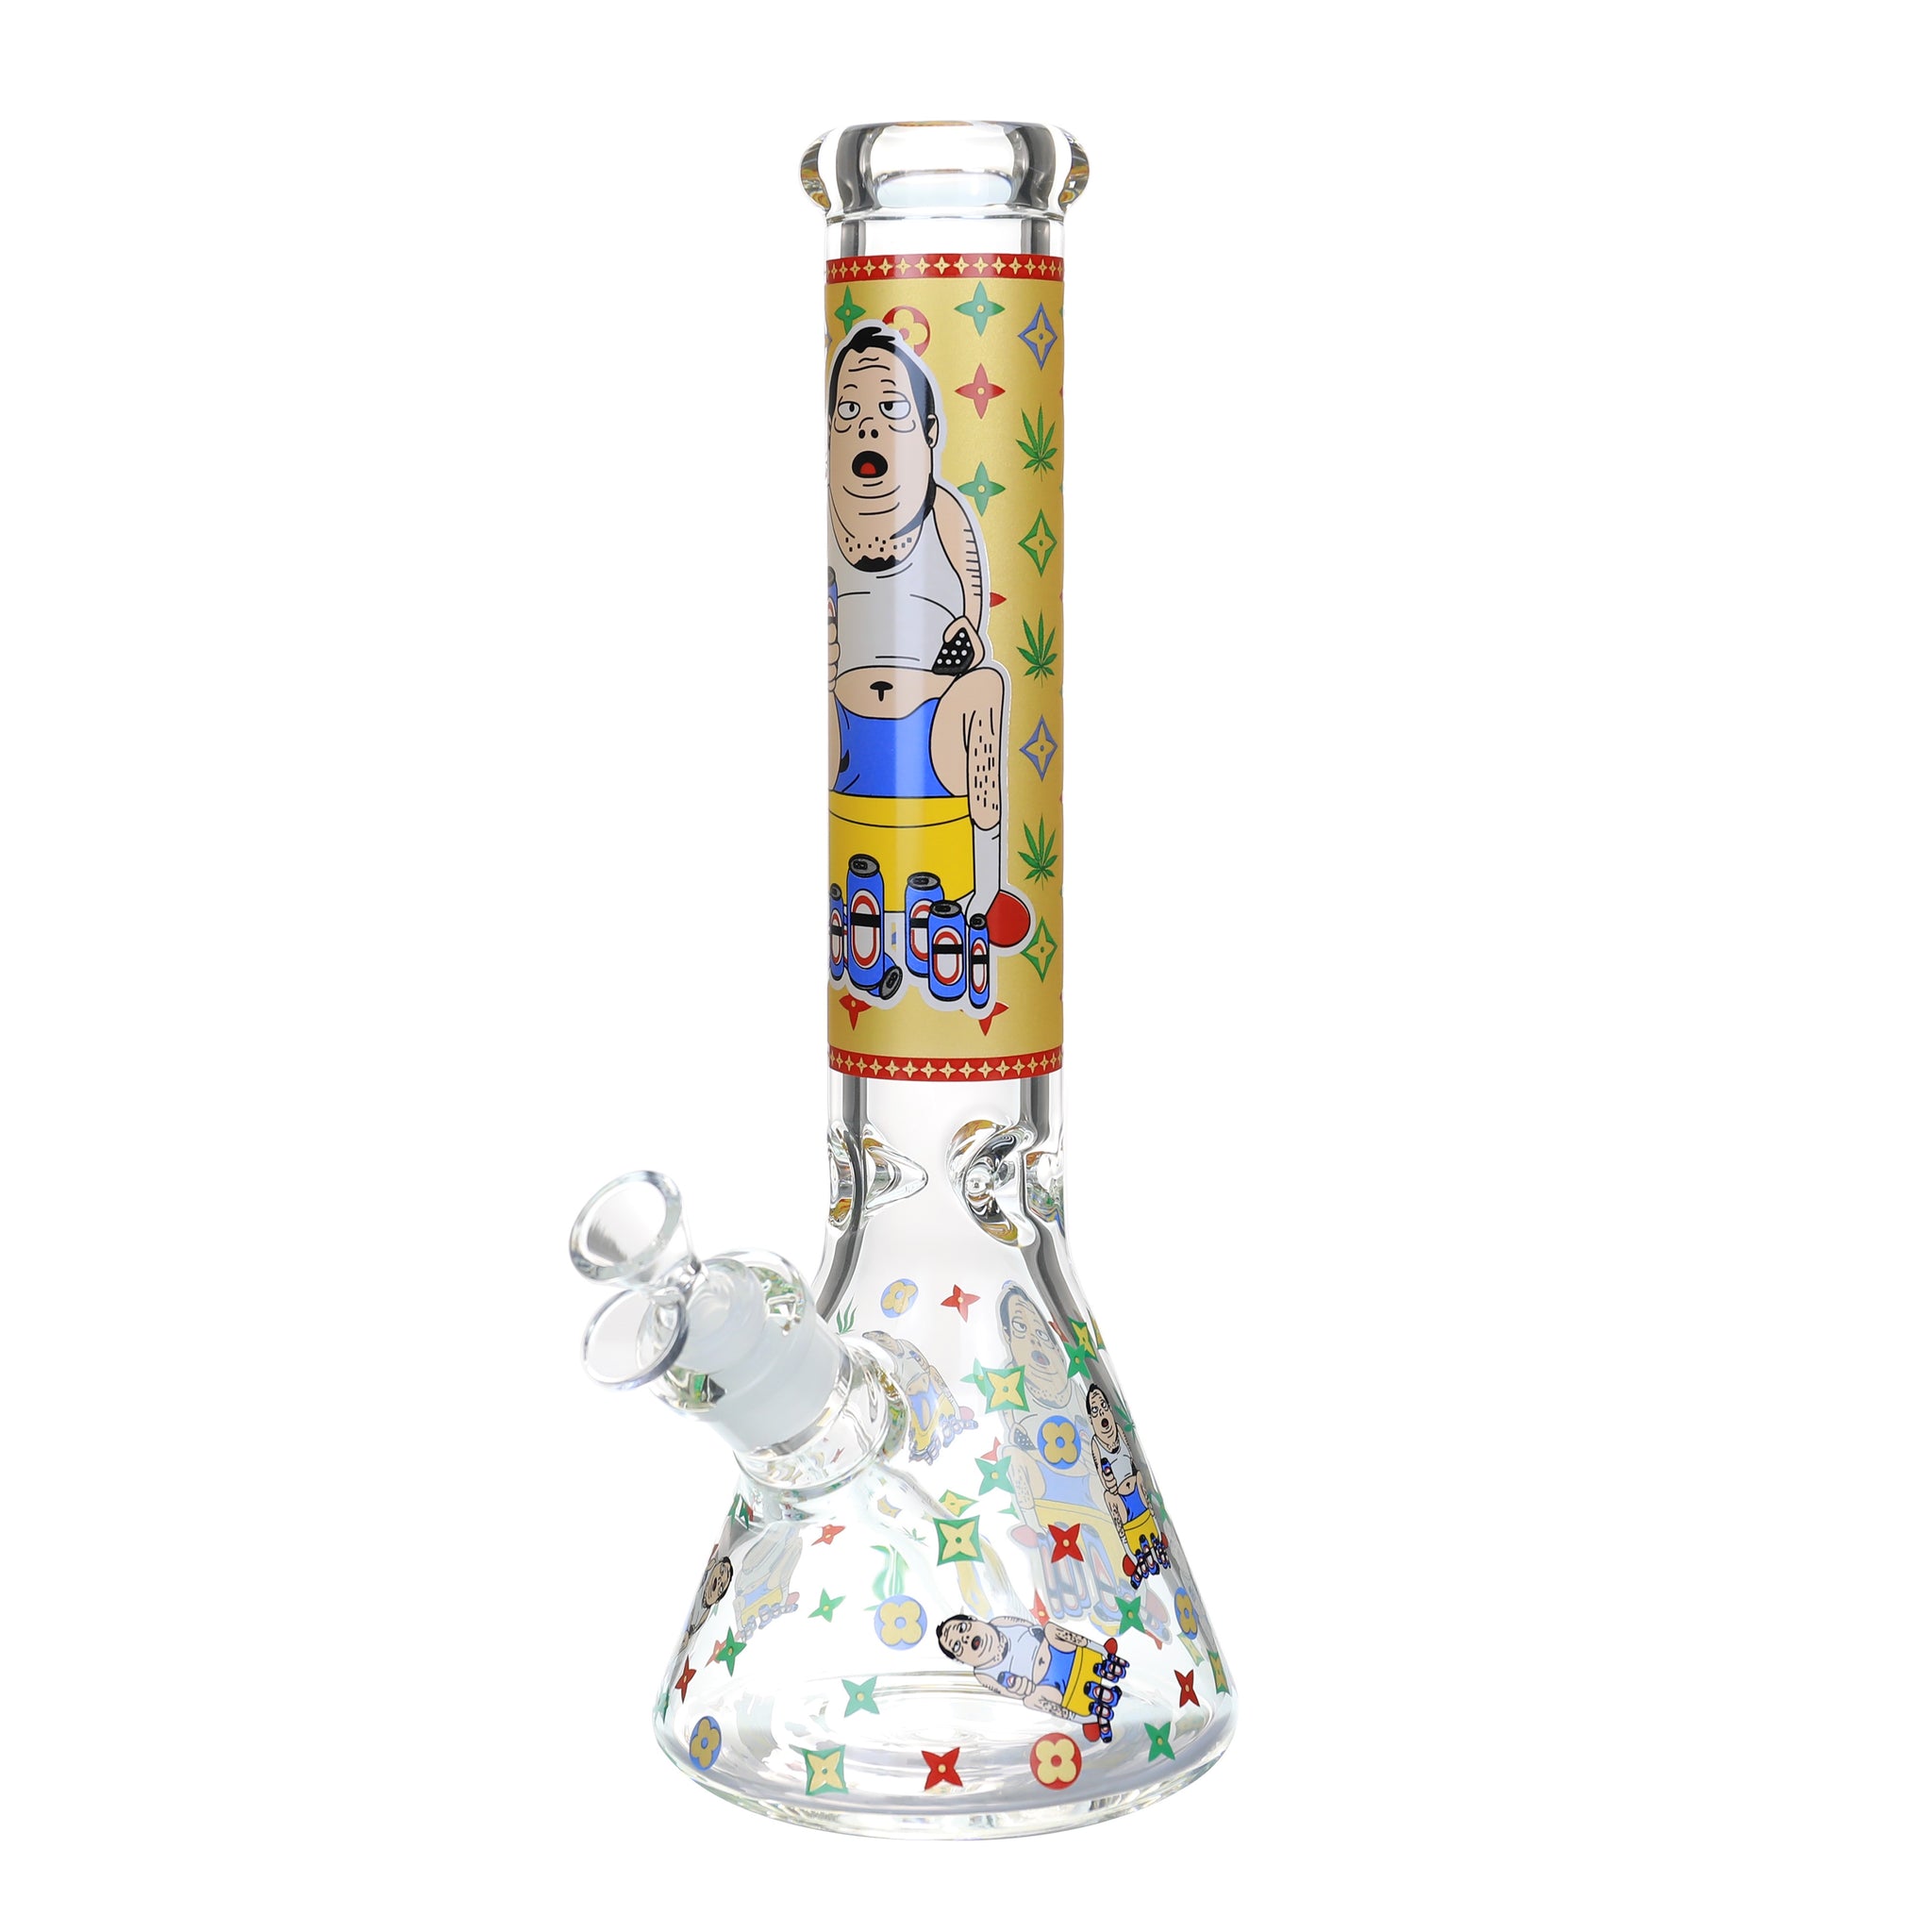 14" 7mm Couch Potato Printed Beaker Water Pipe (WPB-341)